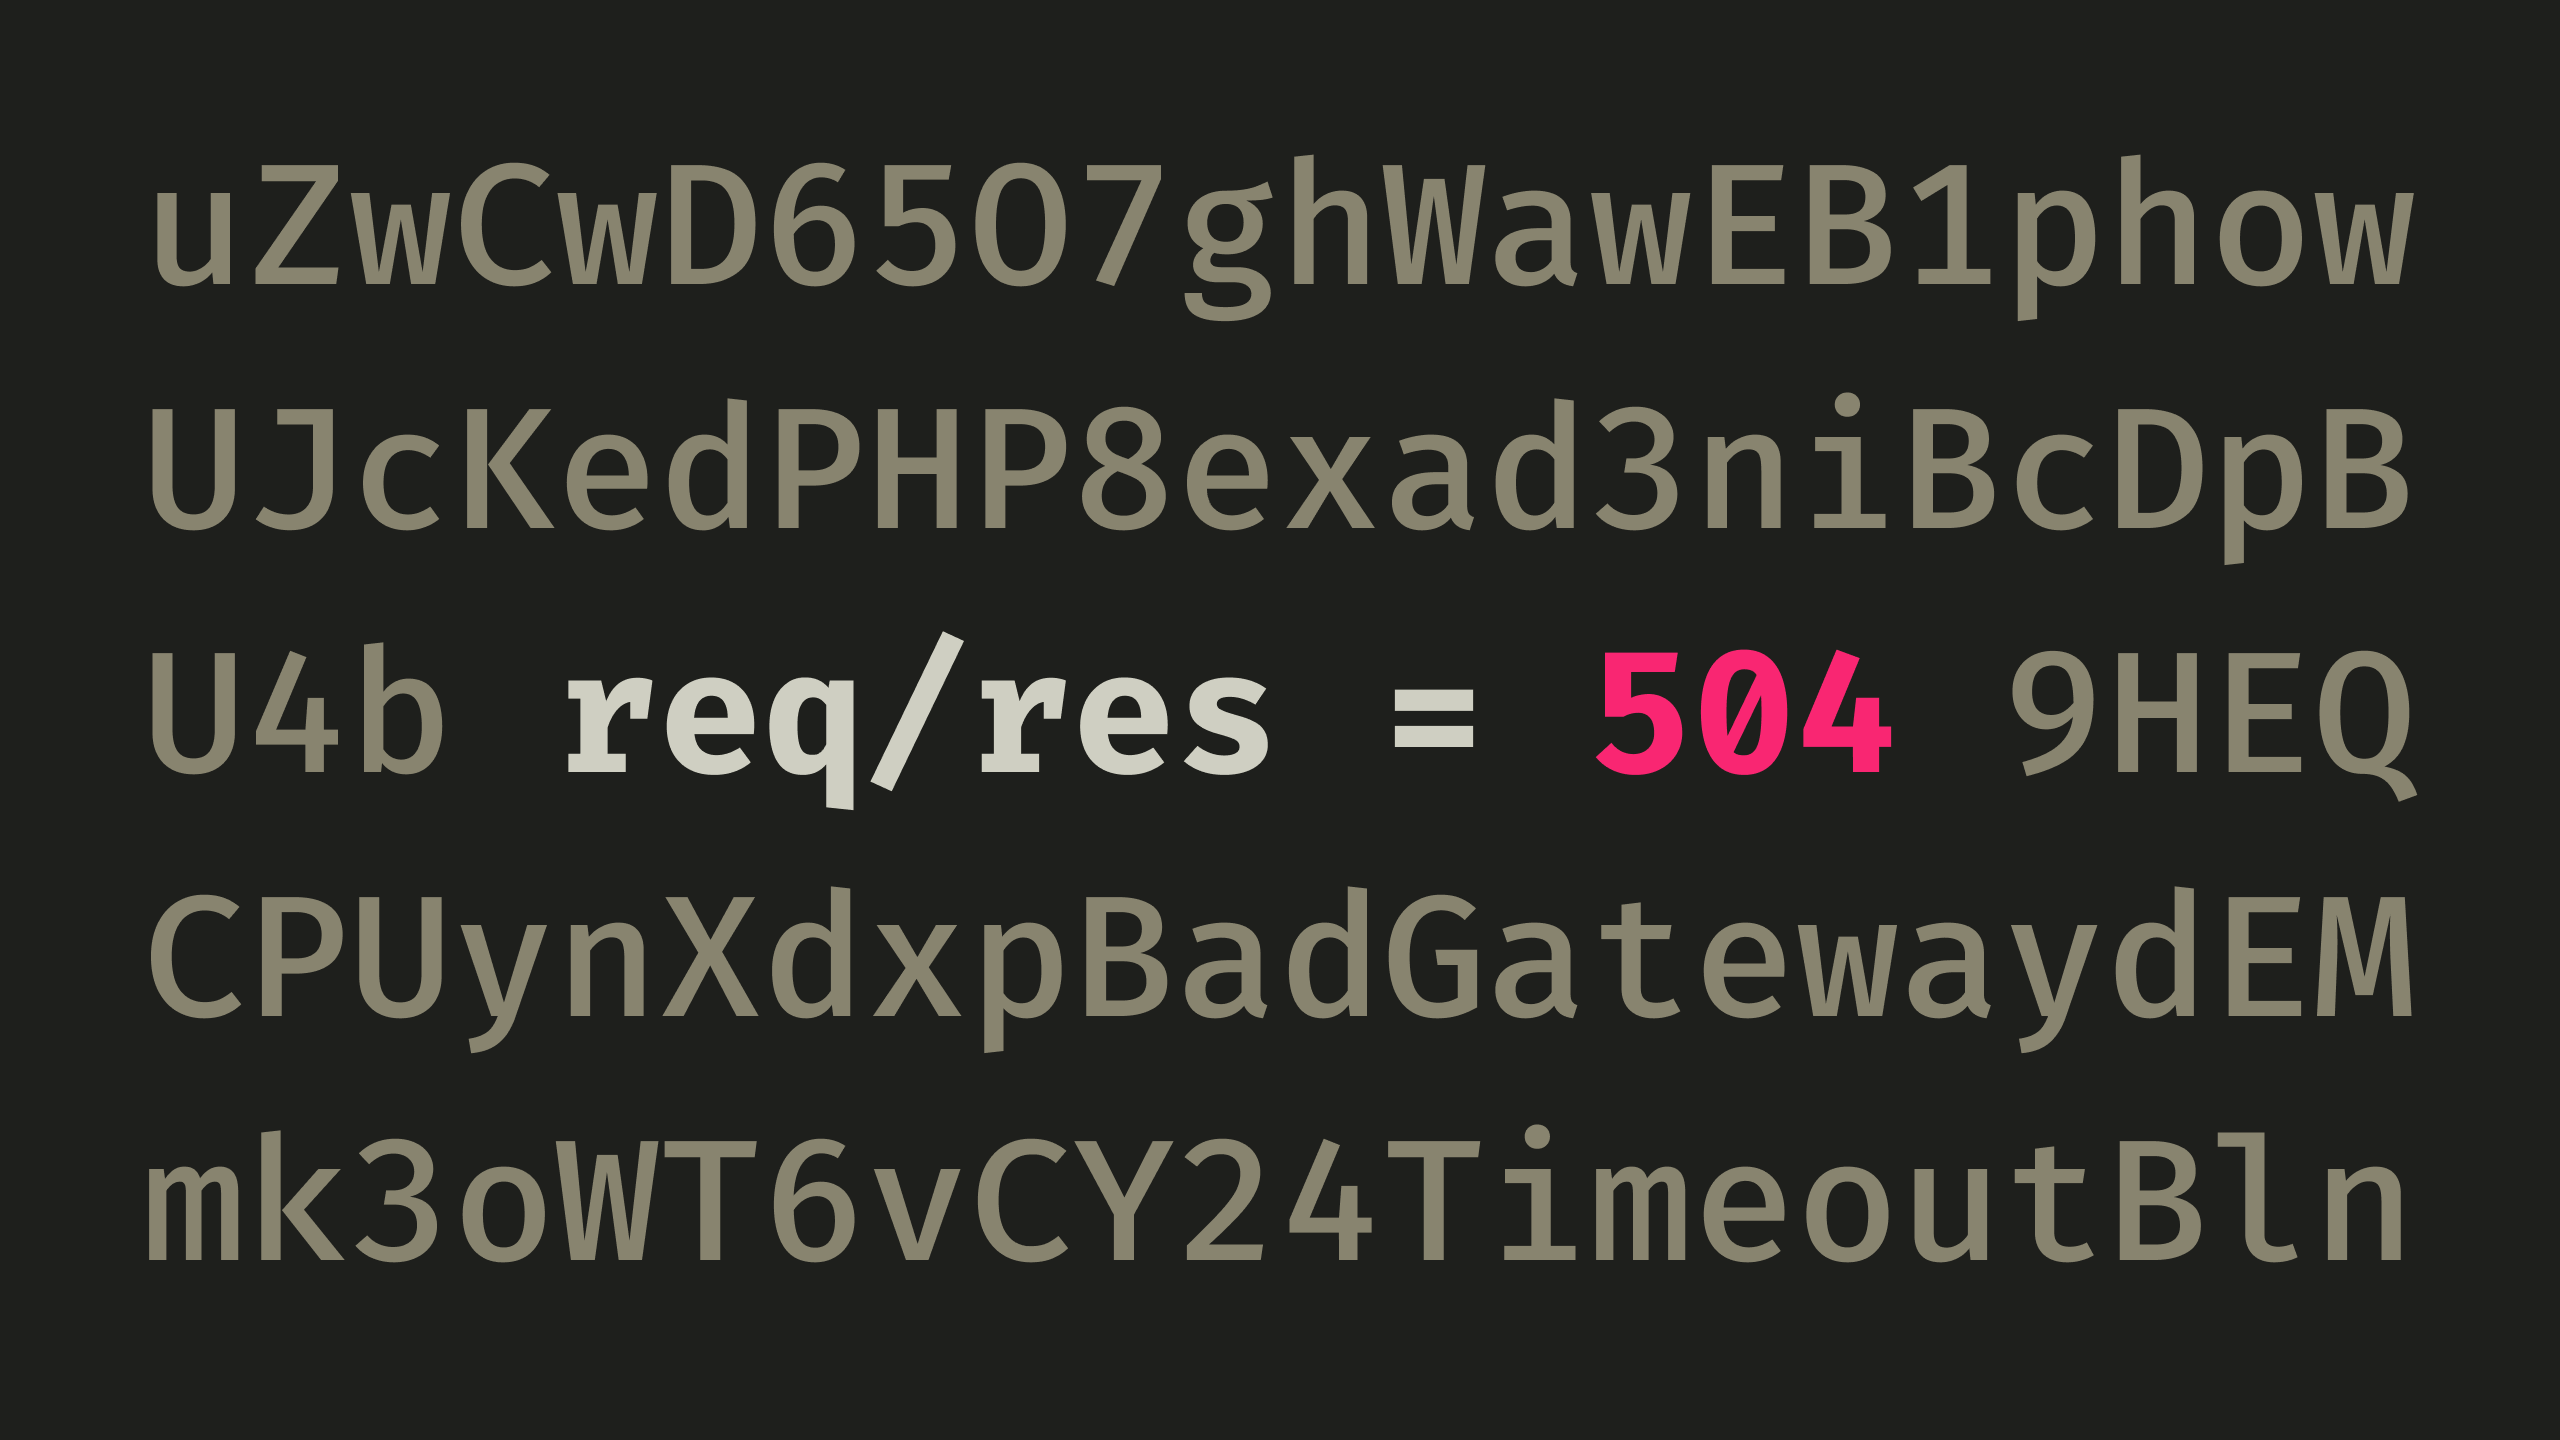 The equation "req/res = 504", surrounded by random characters.